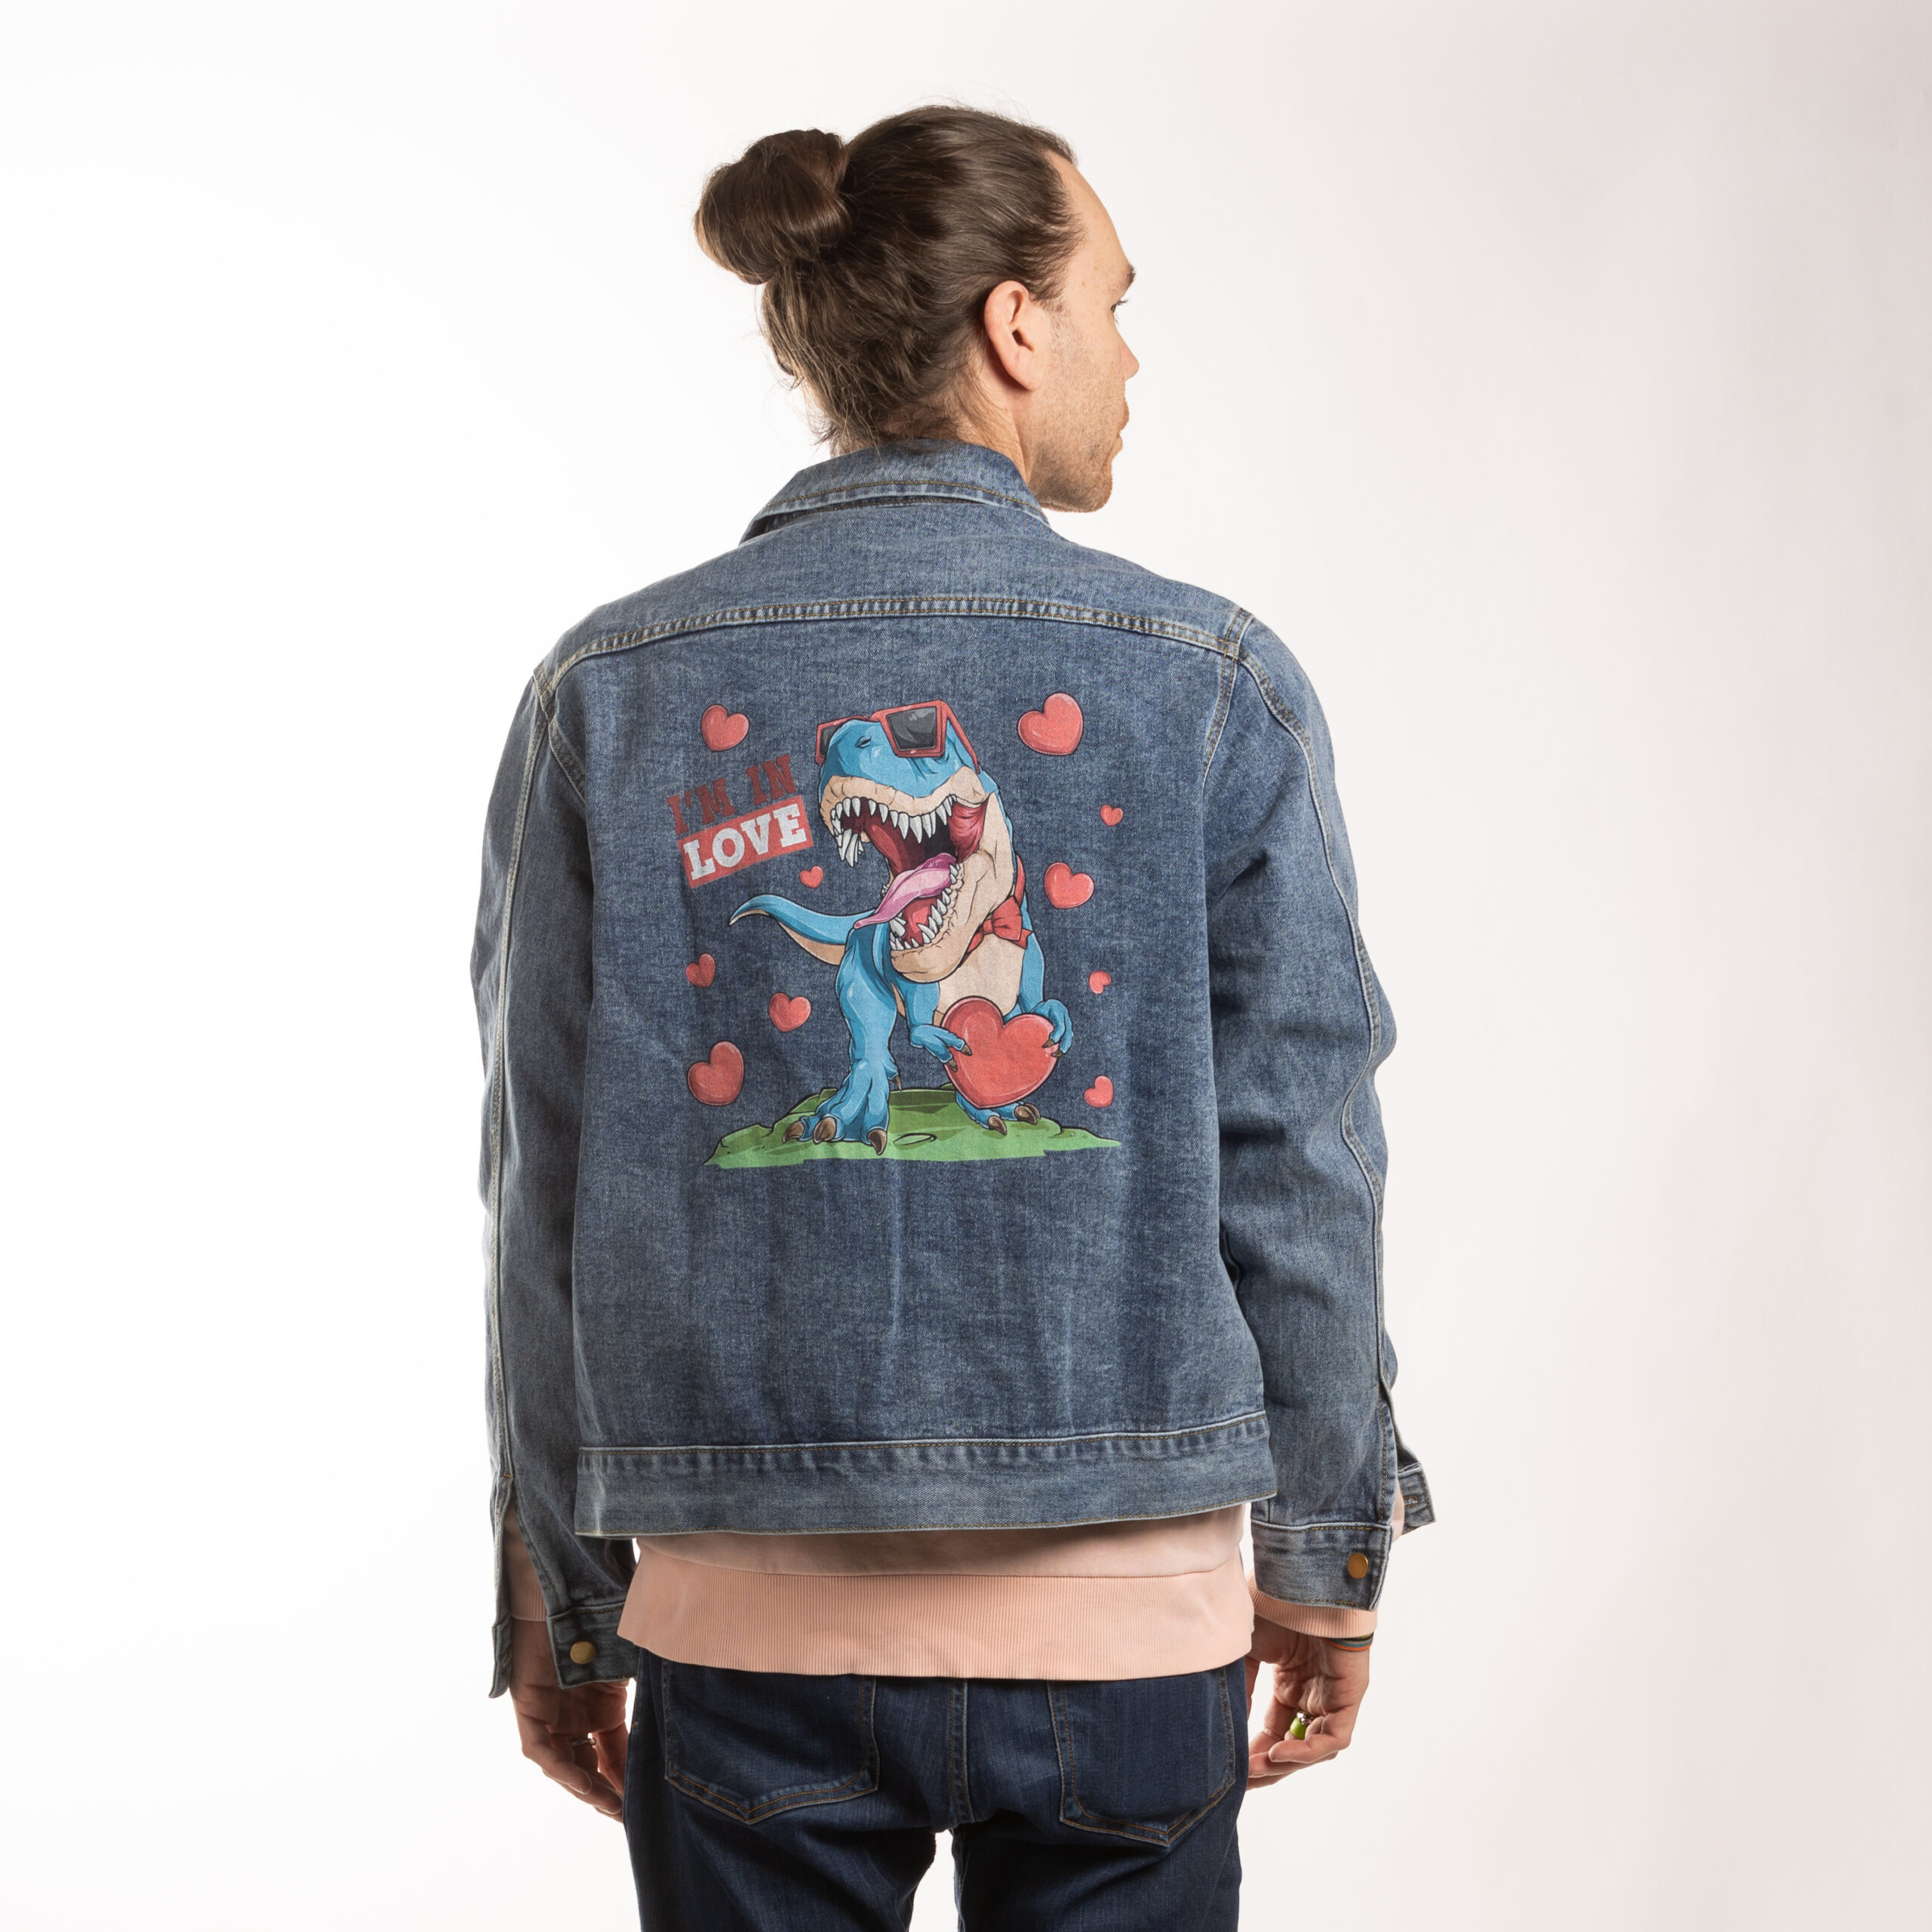 You are currently viewing MWW On Demand CUSTOM MENS DENIM JACKET